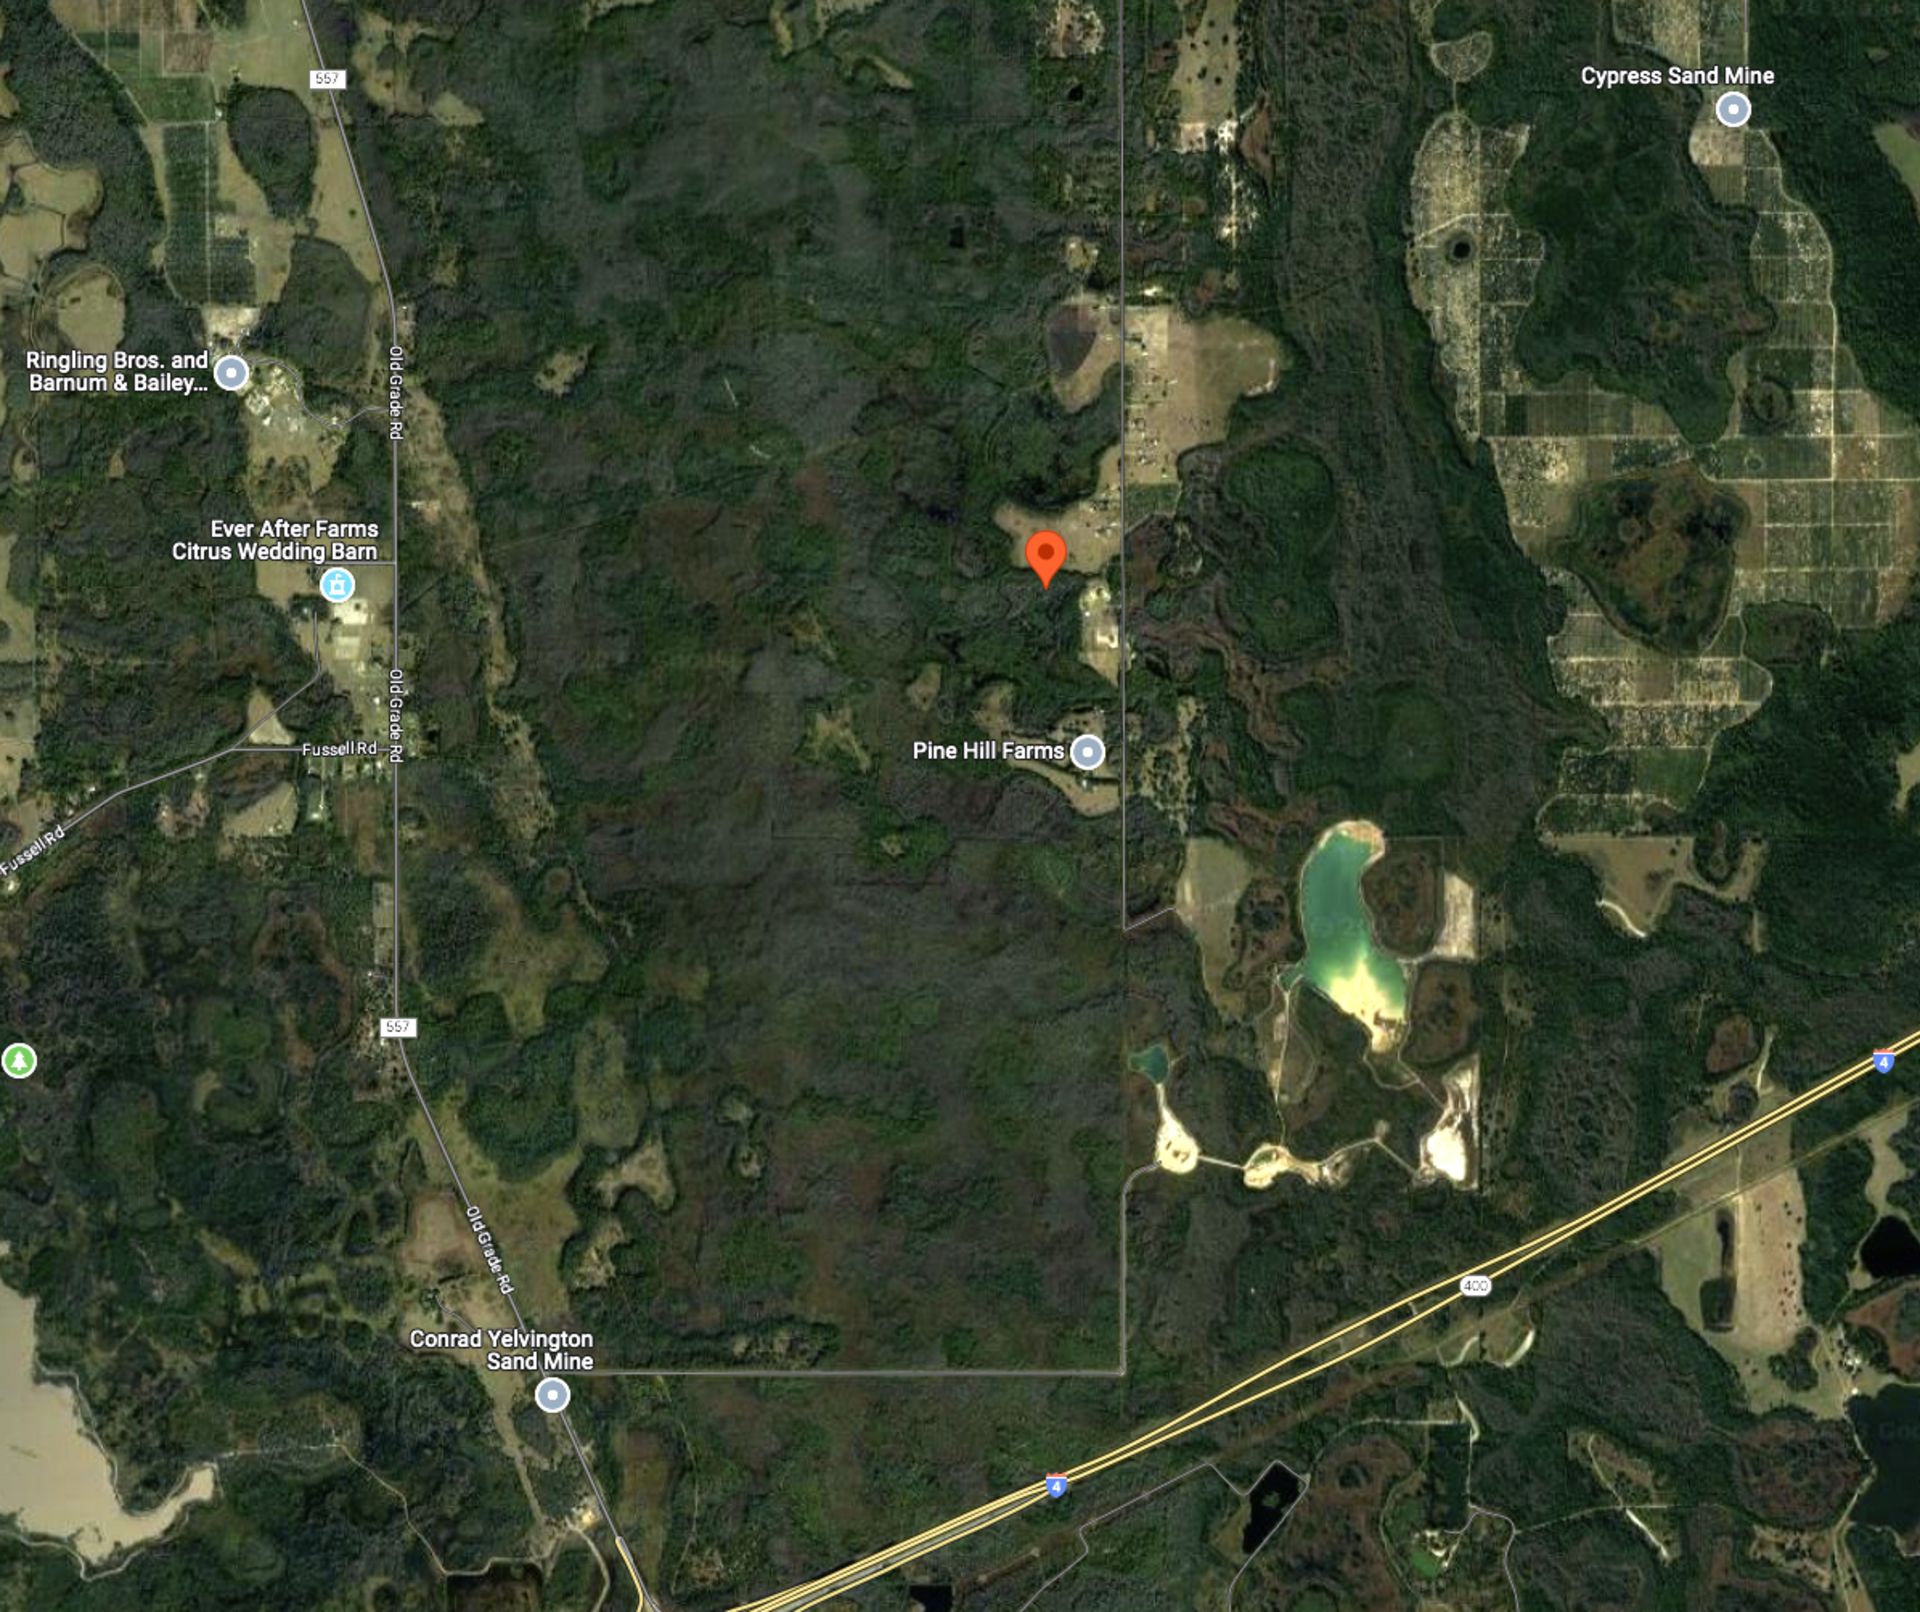 Diversify Your Real Estate Portfolio with this 1-Acre Lot in Sunny Polk County, Florida! - Image 10 of 12